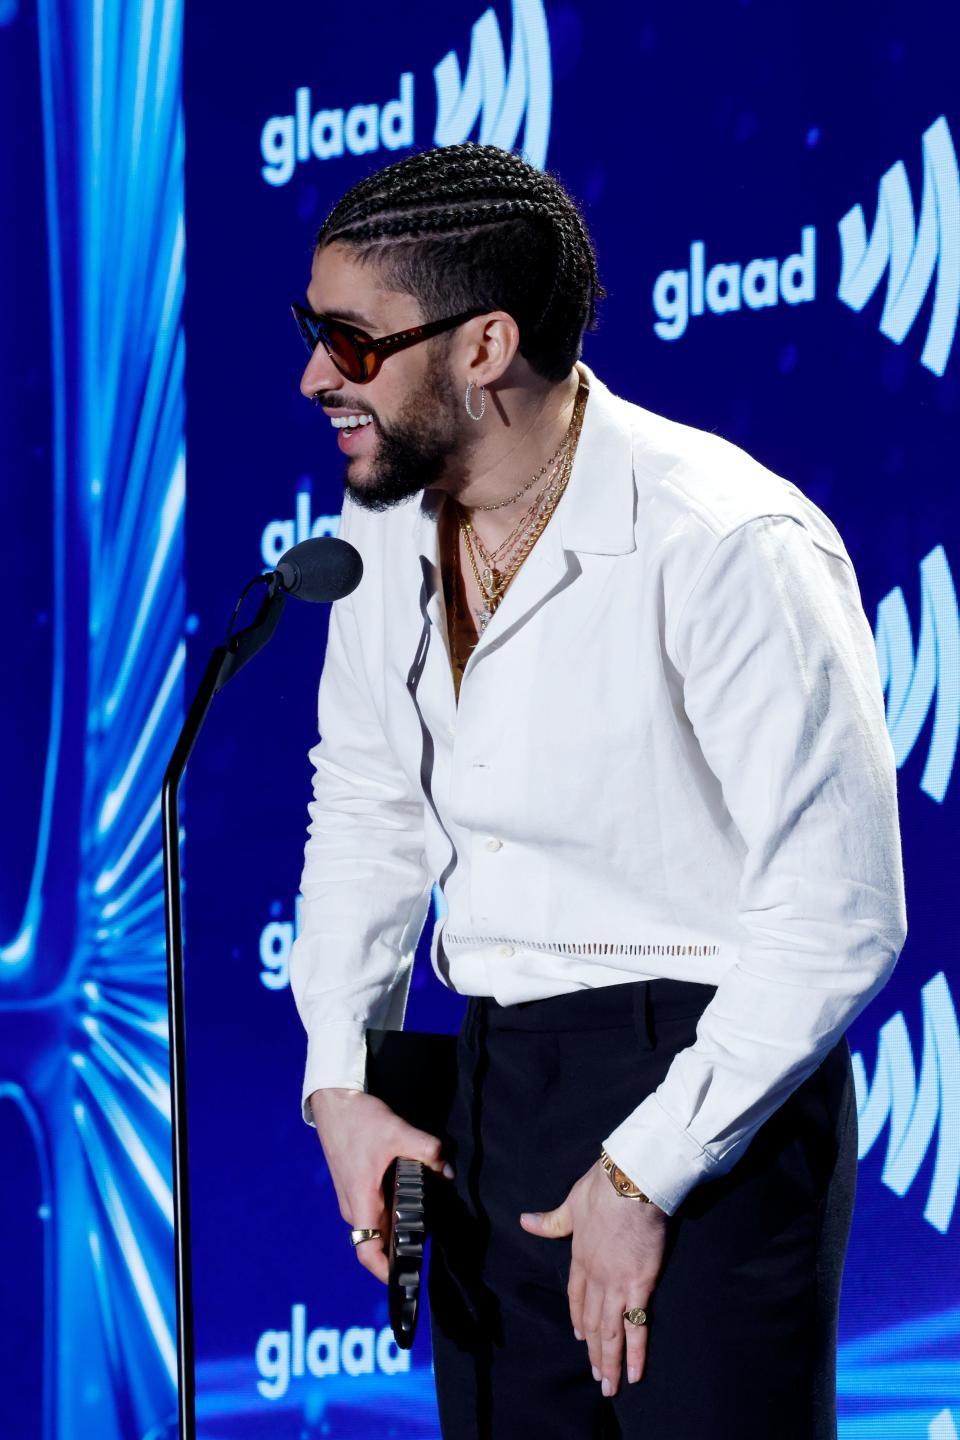 "I don't do anything expecting an award … I do everything because of how I feel and that's all I have done," Bad Bunny said during his speech at the GLAAD Awards.